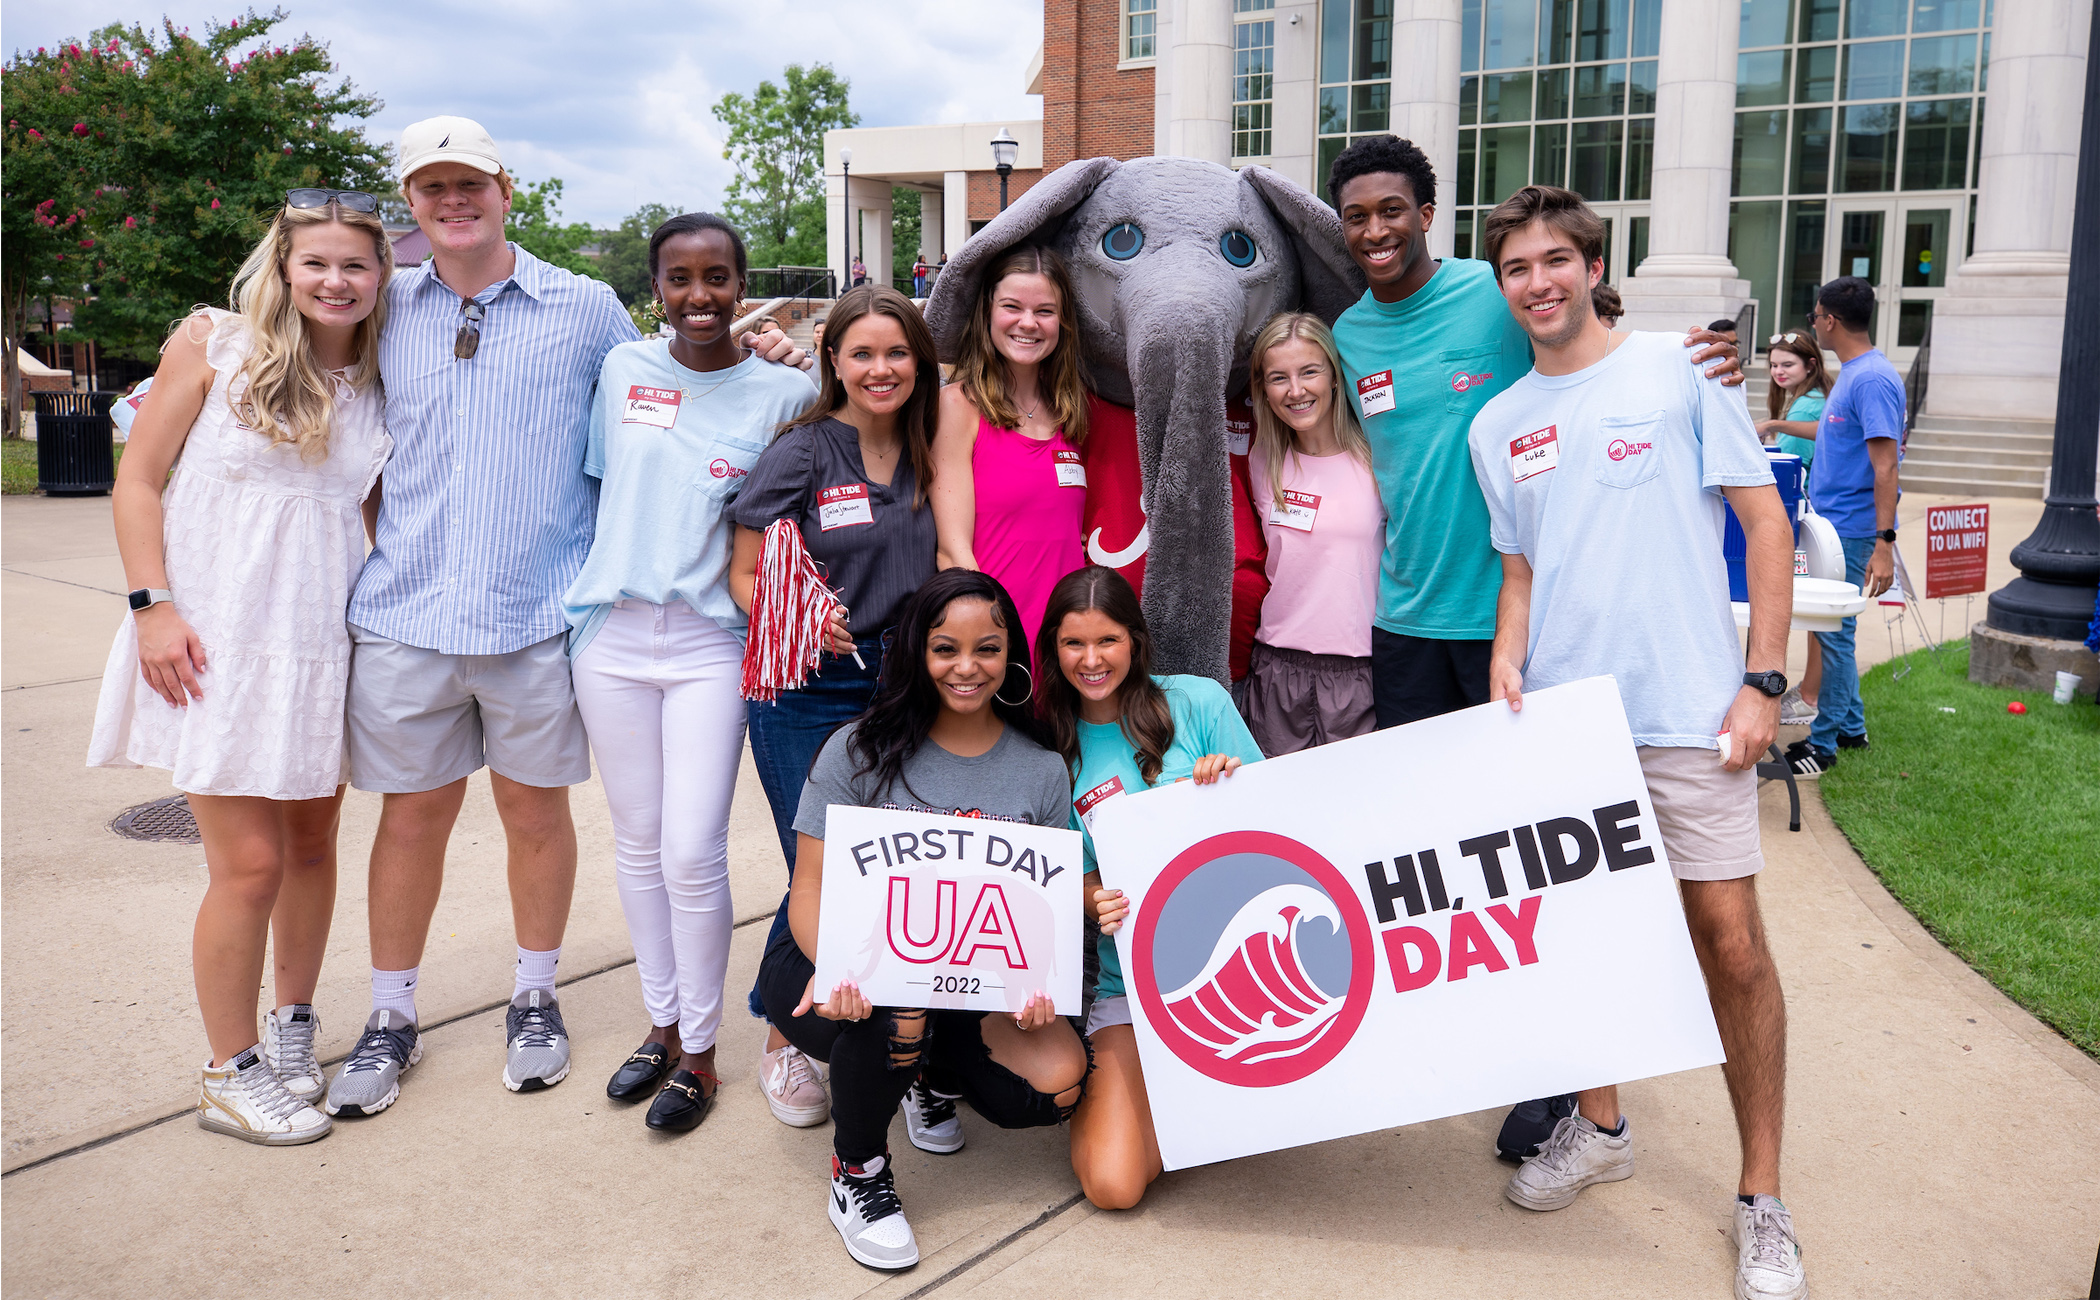 A group of students posing with Big Al on the first day of classes